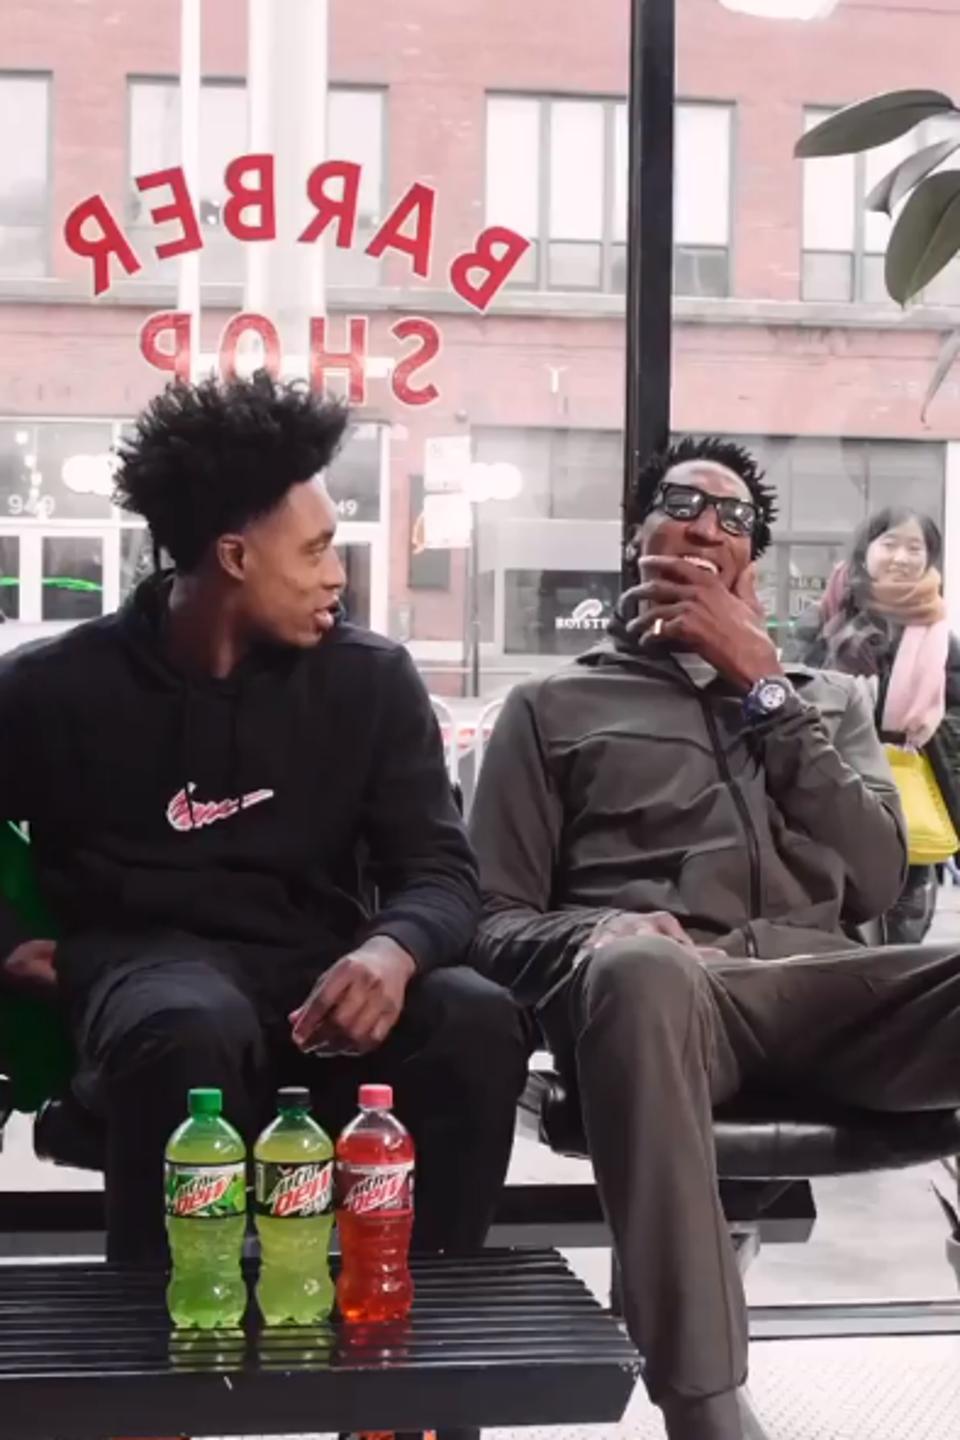 Collin Sexton chats with Scottie Pippen at the Blind Barber in Chicago's Fulton Market on Saturday, February 15, 20202 as part of NBA All-Star weekend.